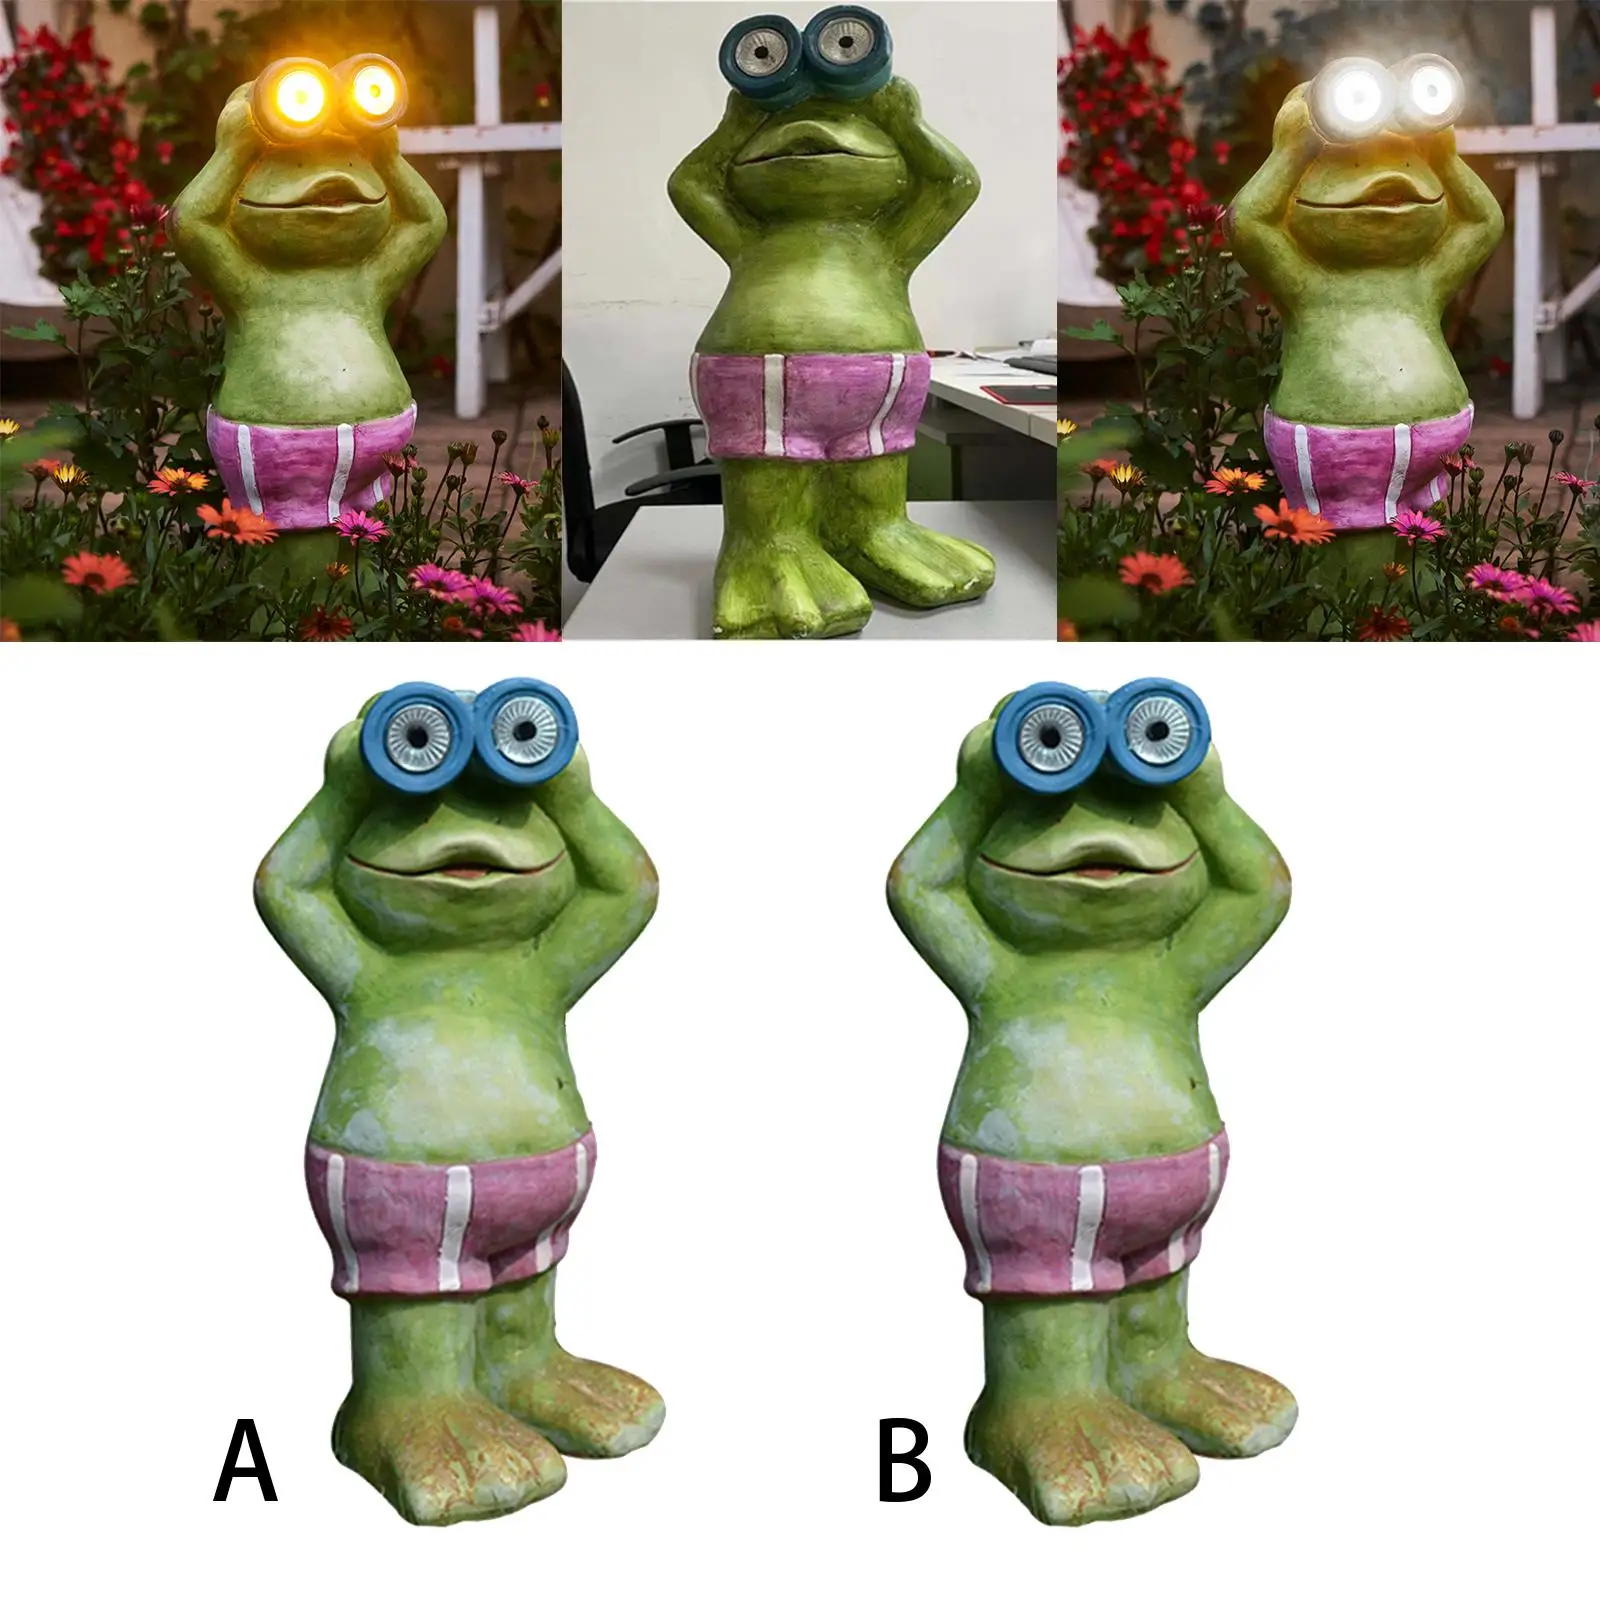 Resin Garden Lights Solar Powered Frog Shaped Stakes for Outdoor Walkway